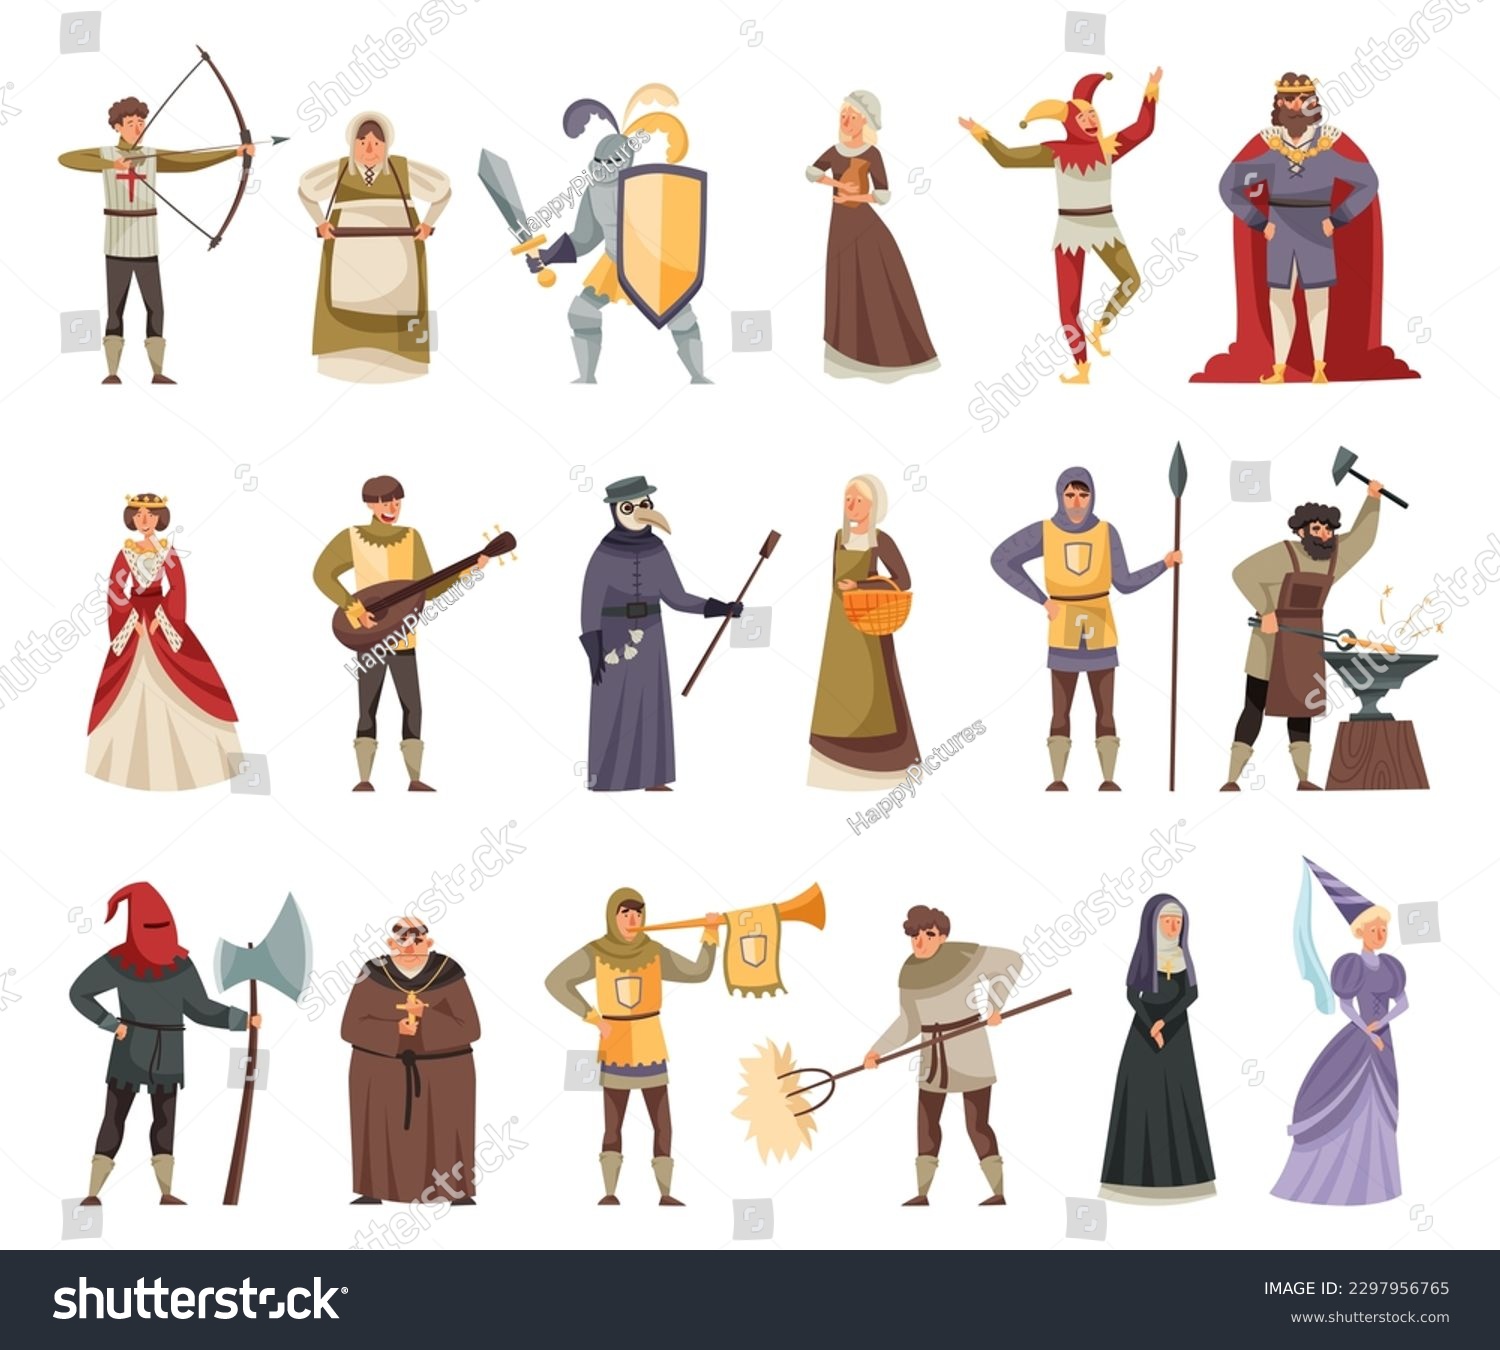 Middle Ages with Medieval People Characters Big Vector Illustration Set #2297956765